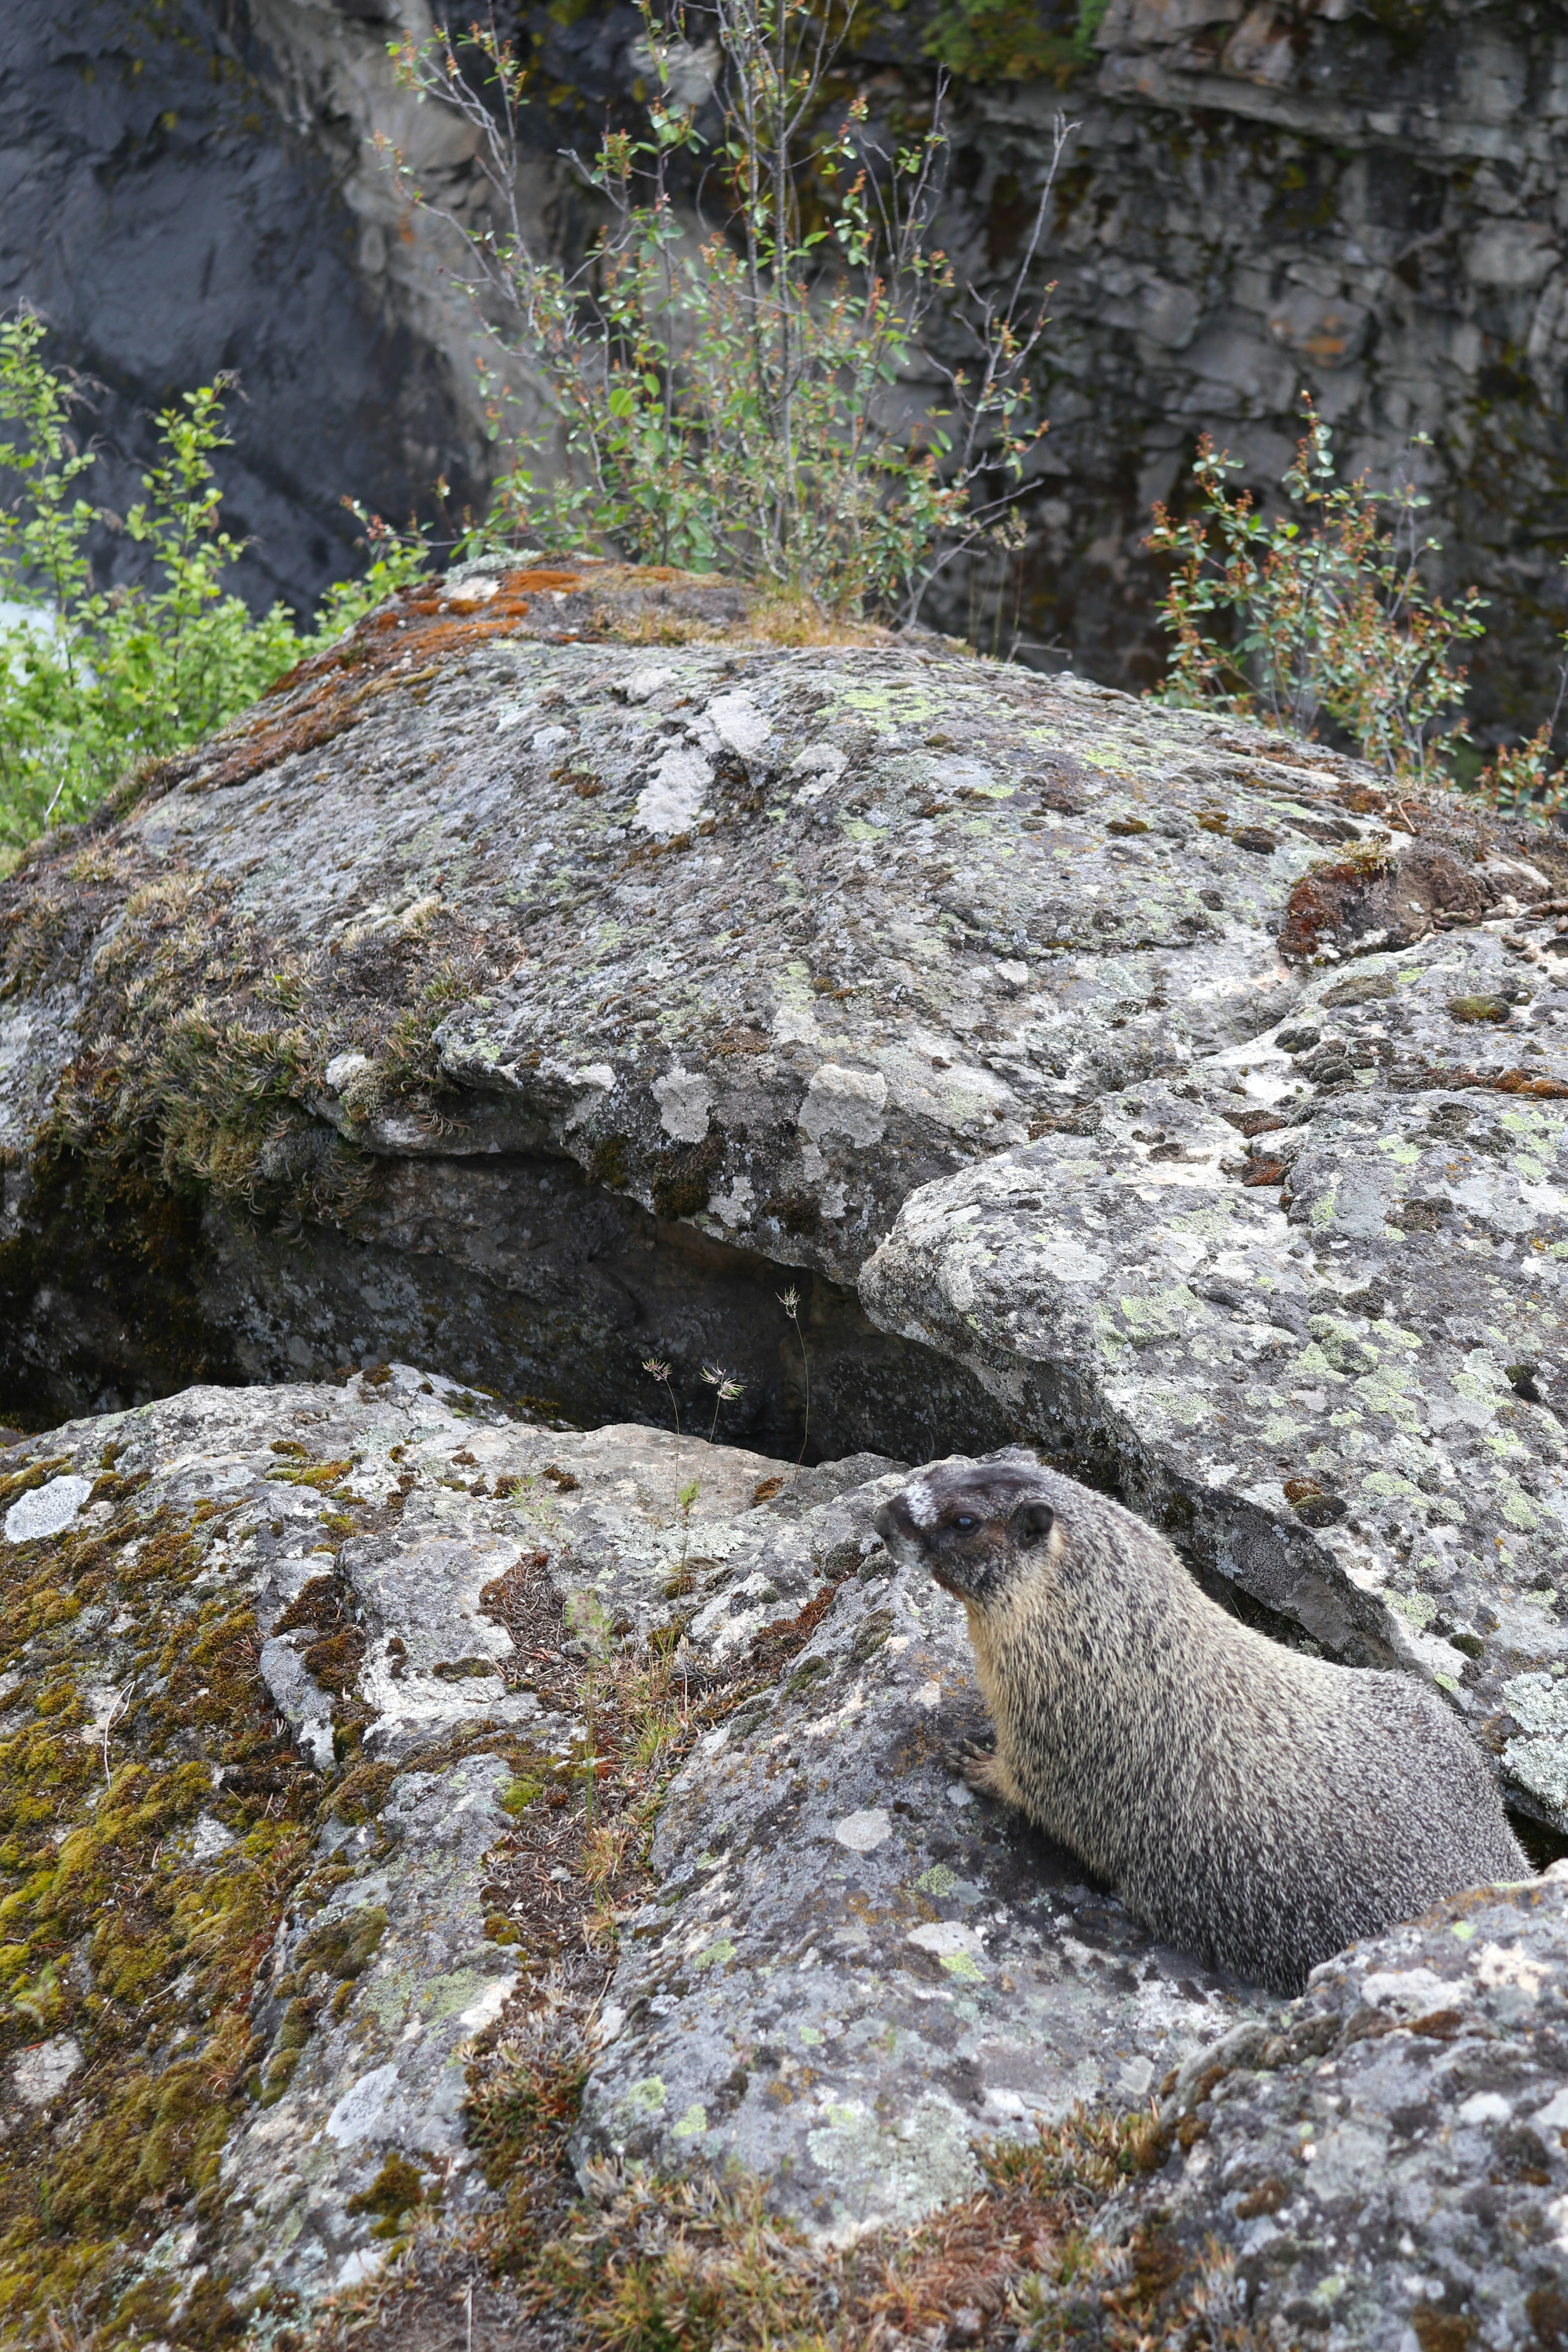 A groundhog sitting on rocks next to a valley.